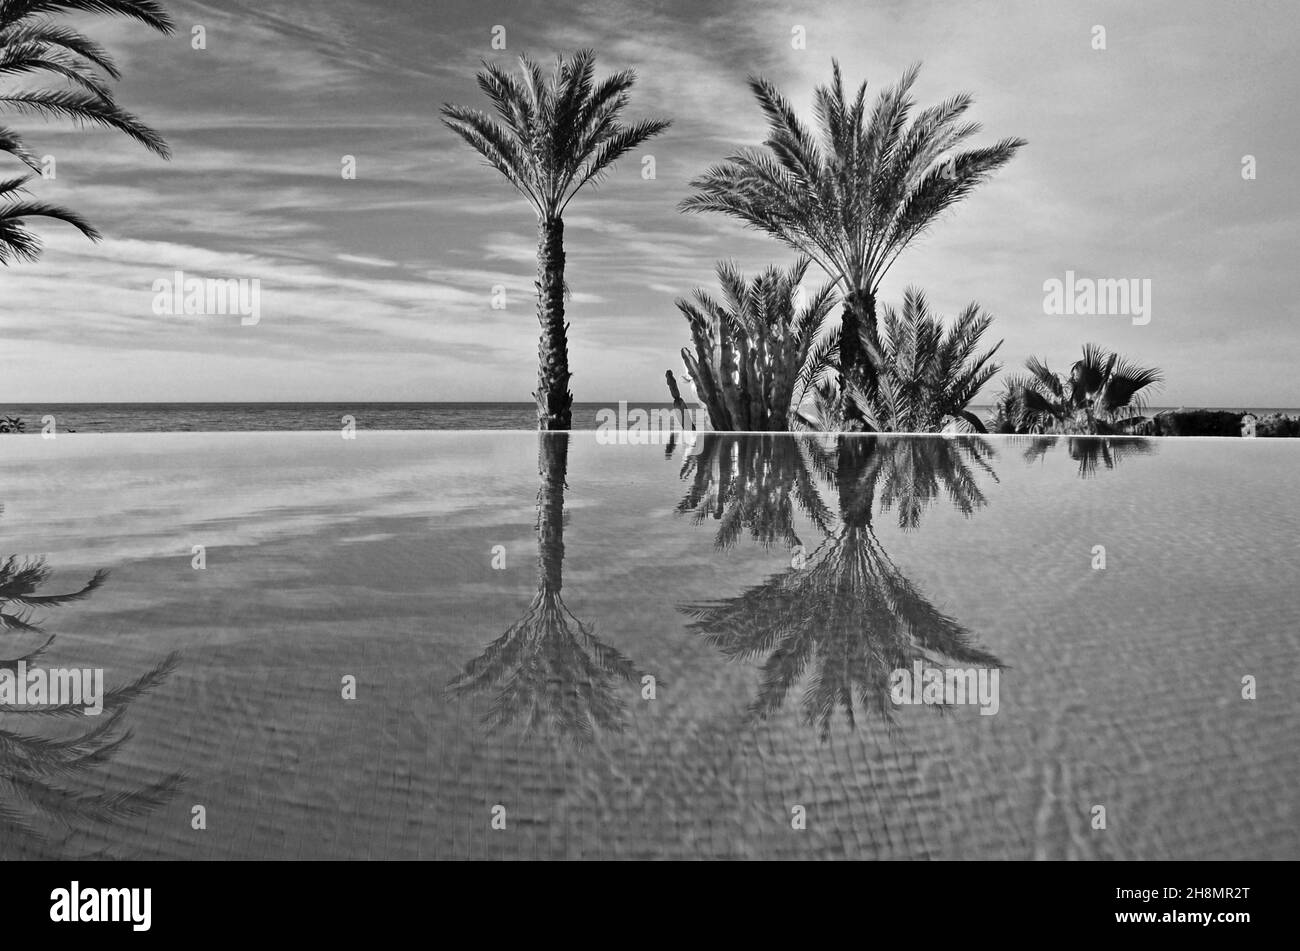 Infinity pool with palm trees by the sea, swimming pool by the sea, palm trees reflected in pool, reflection in water, Andalusia, Spain Stock Photo